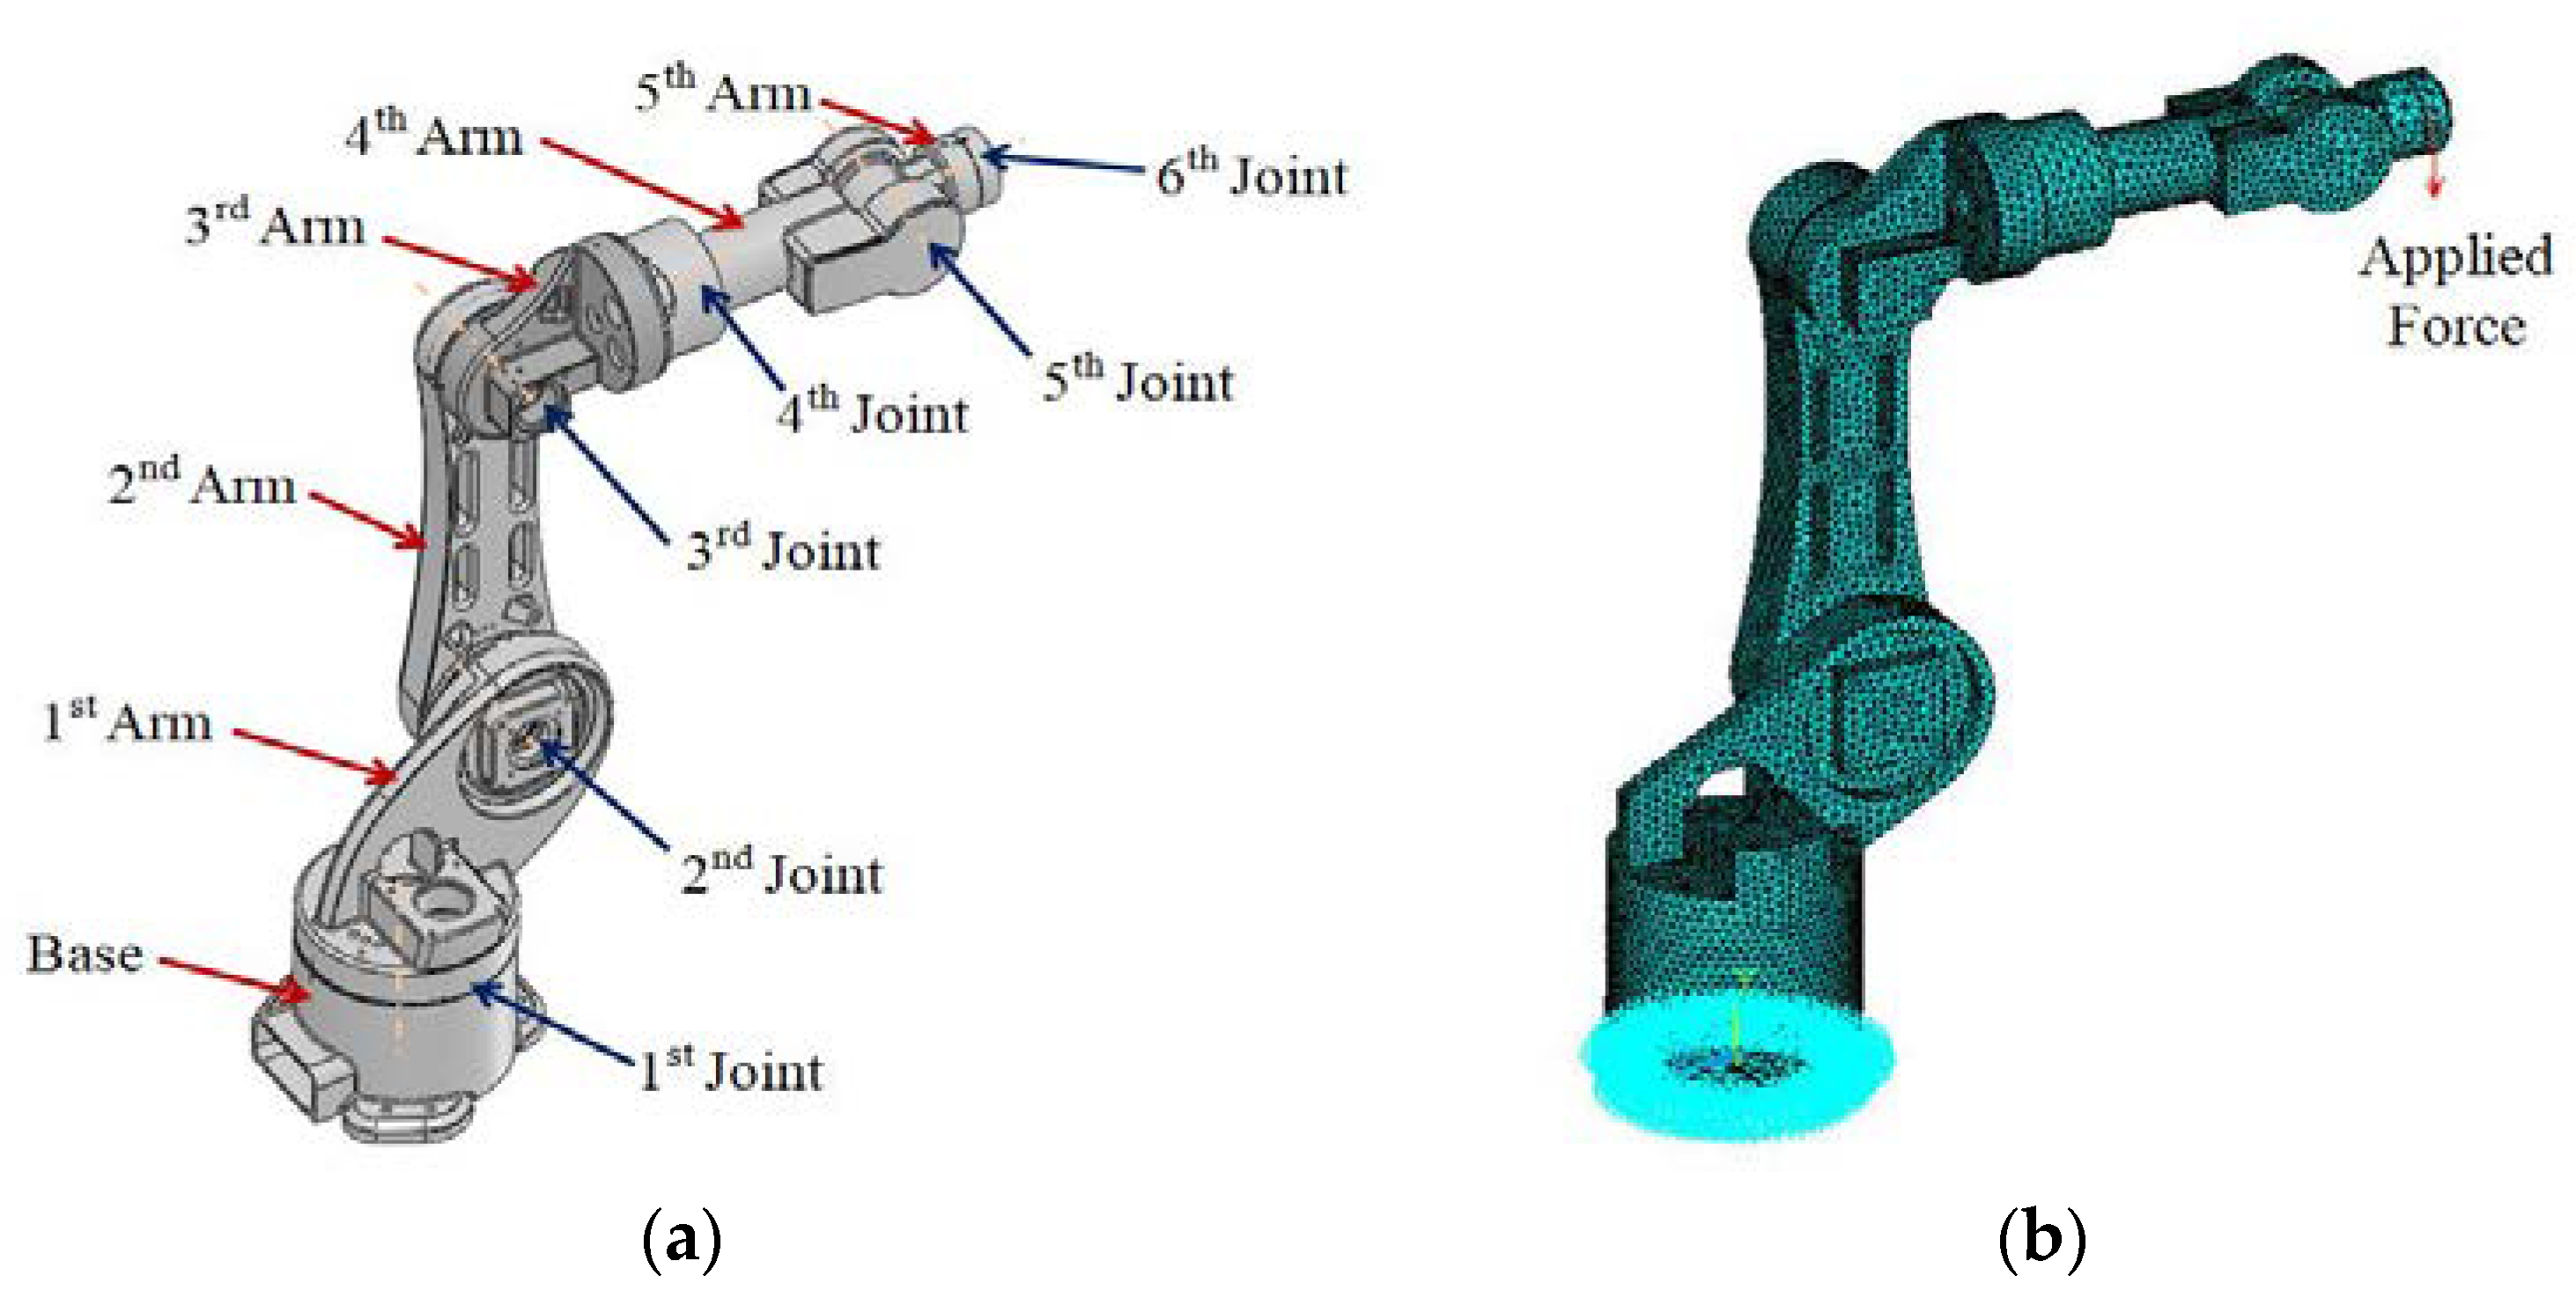 A diagram of a robot arm with 6 joints and 5 arms